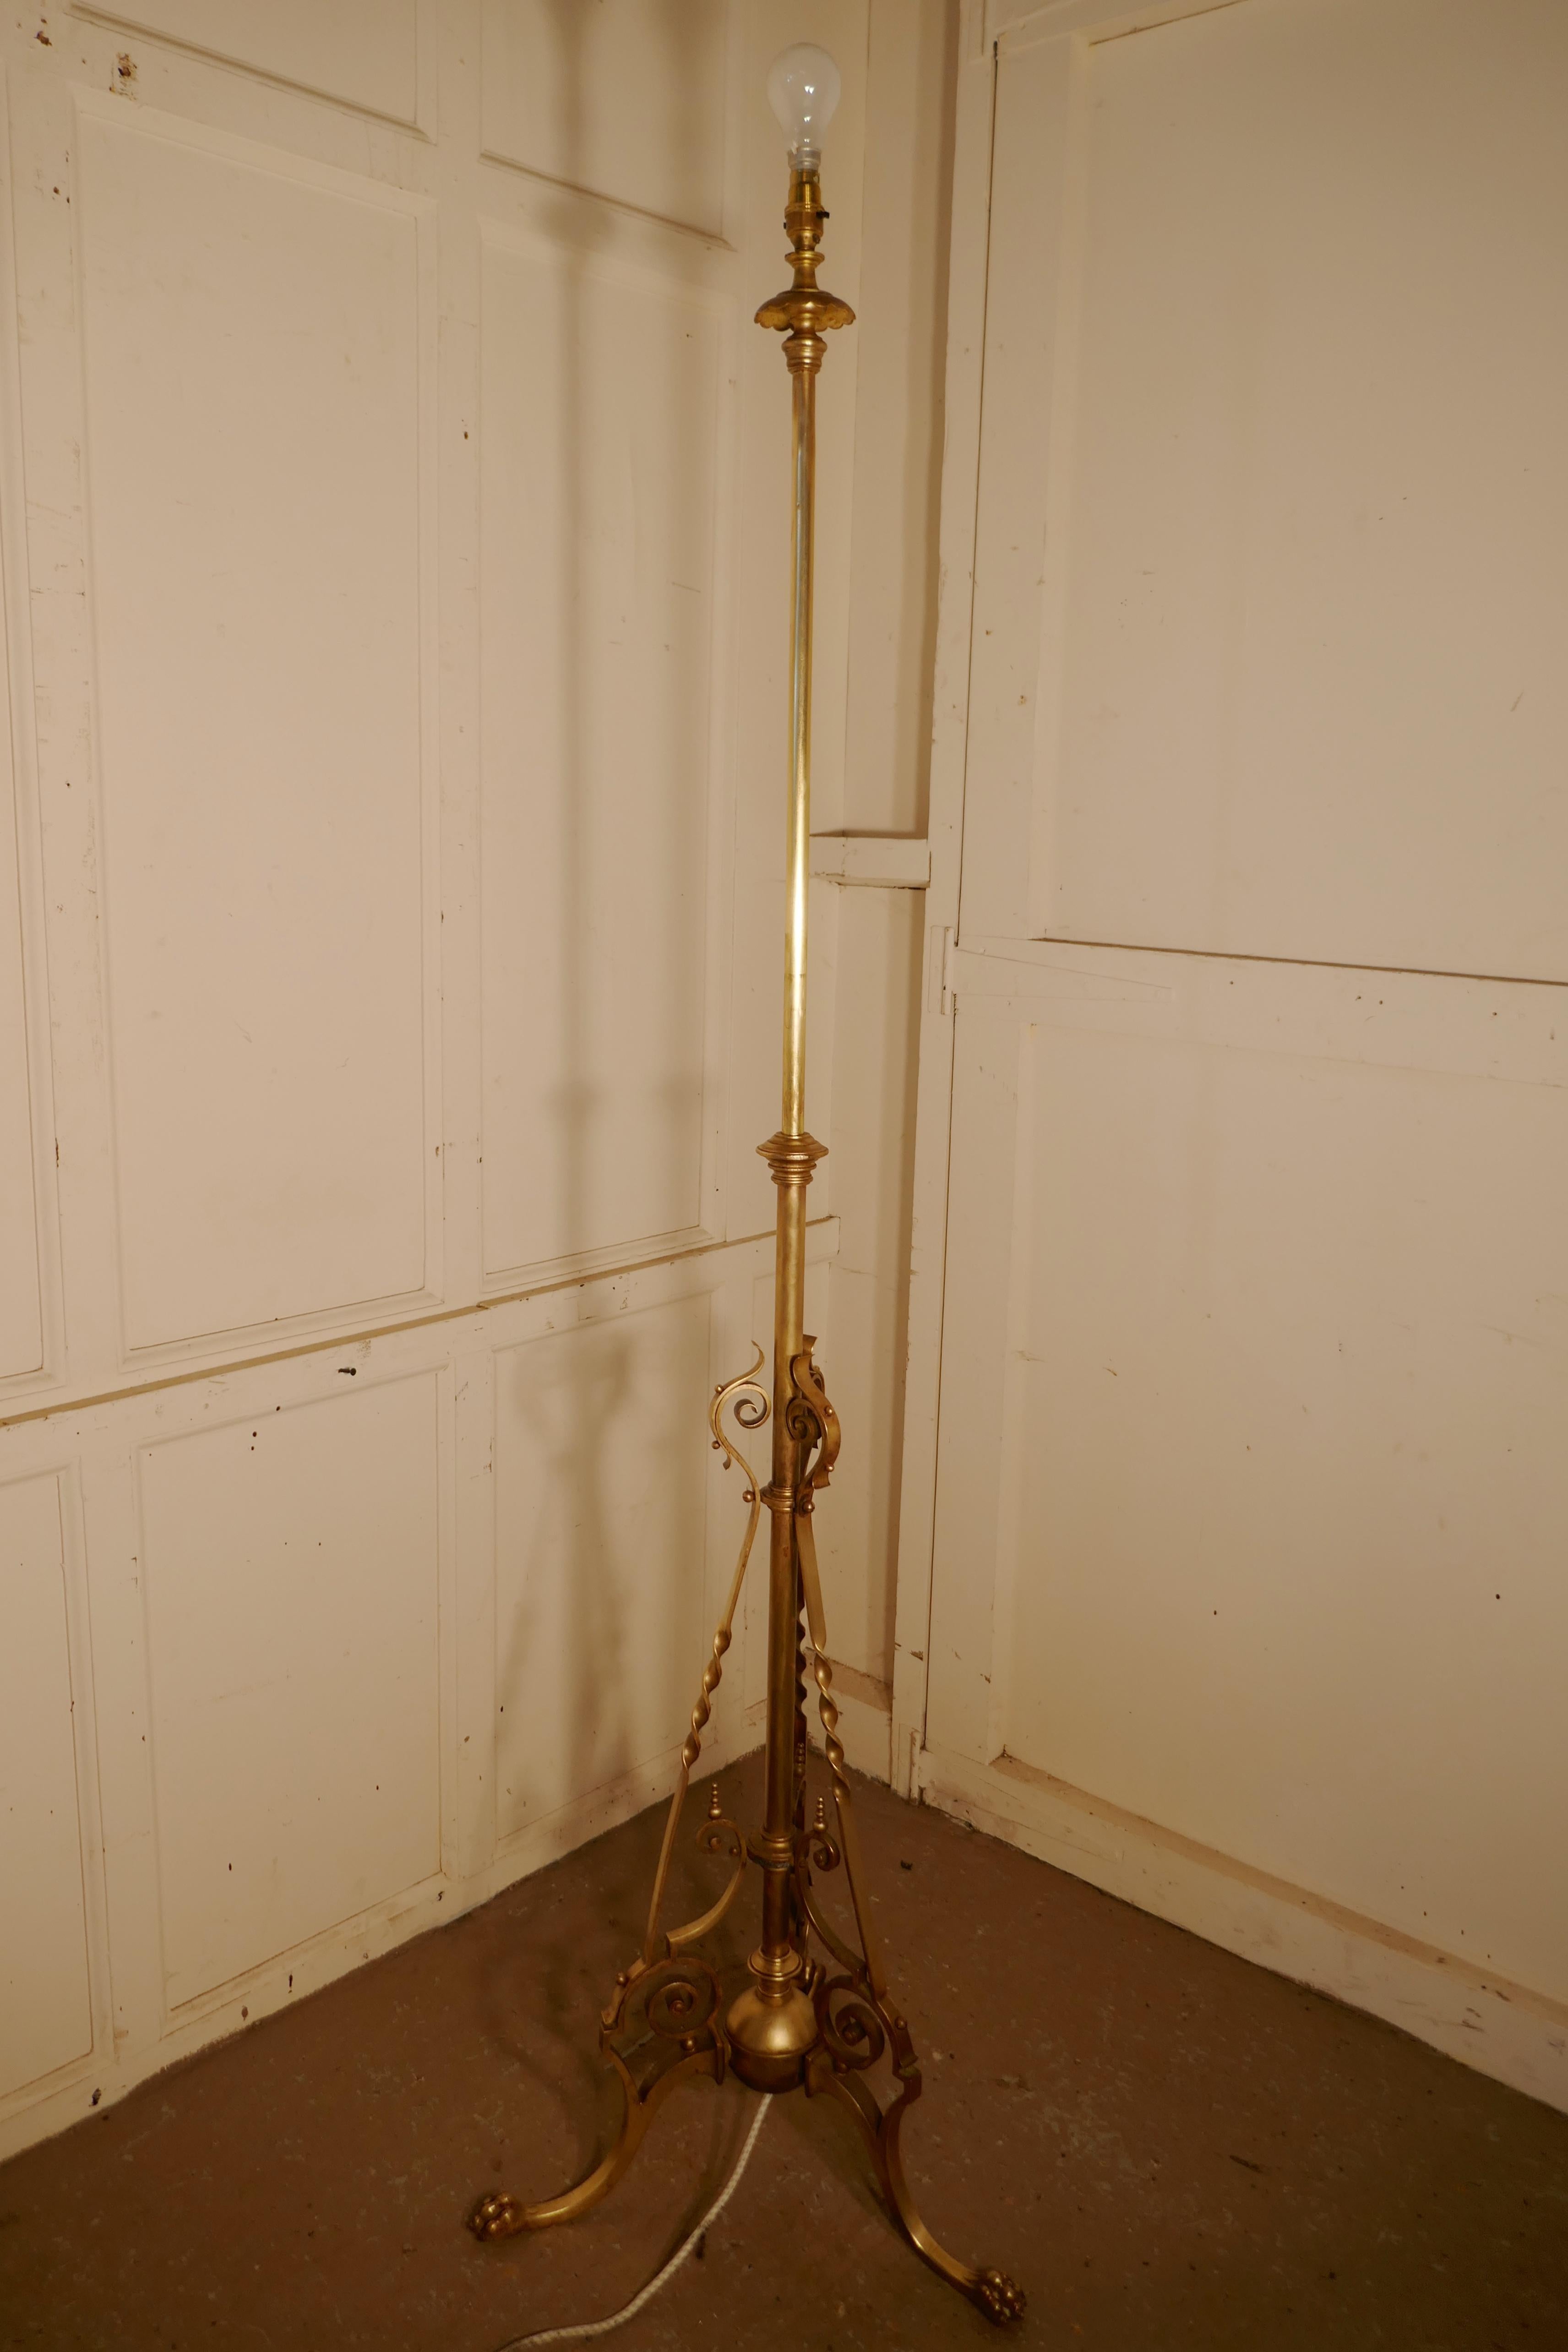 French brass adjustable floor lamp Rococo standard lamp.

This is a very attractive piece, the lamp has a telescopic action and a decorative wrought brass base and a the upright can be extended to raise the height of the lamp
I have shown the